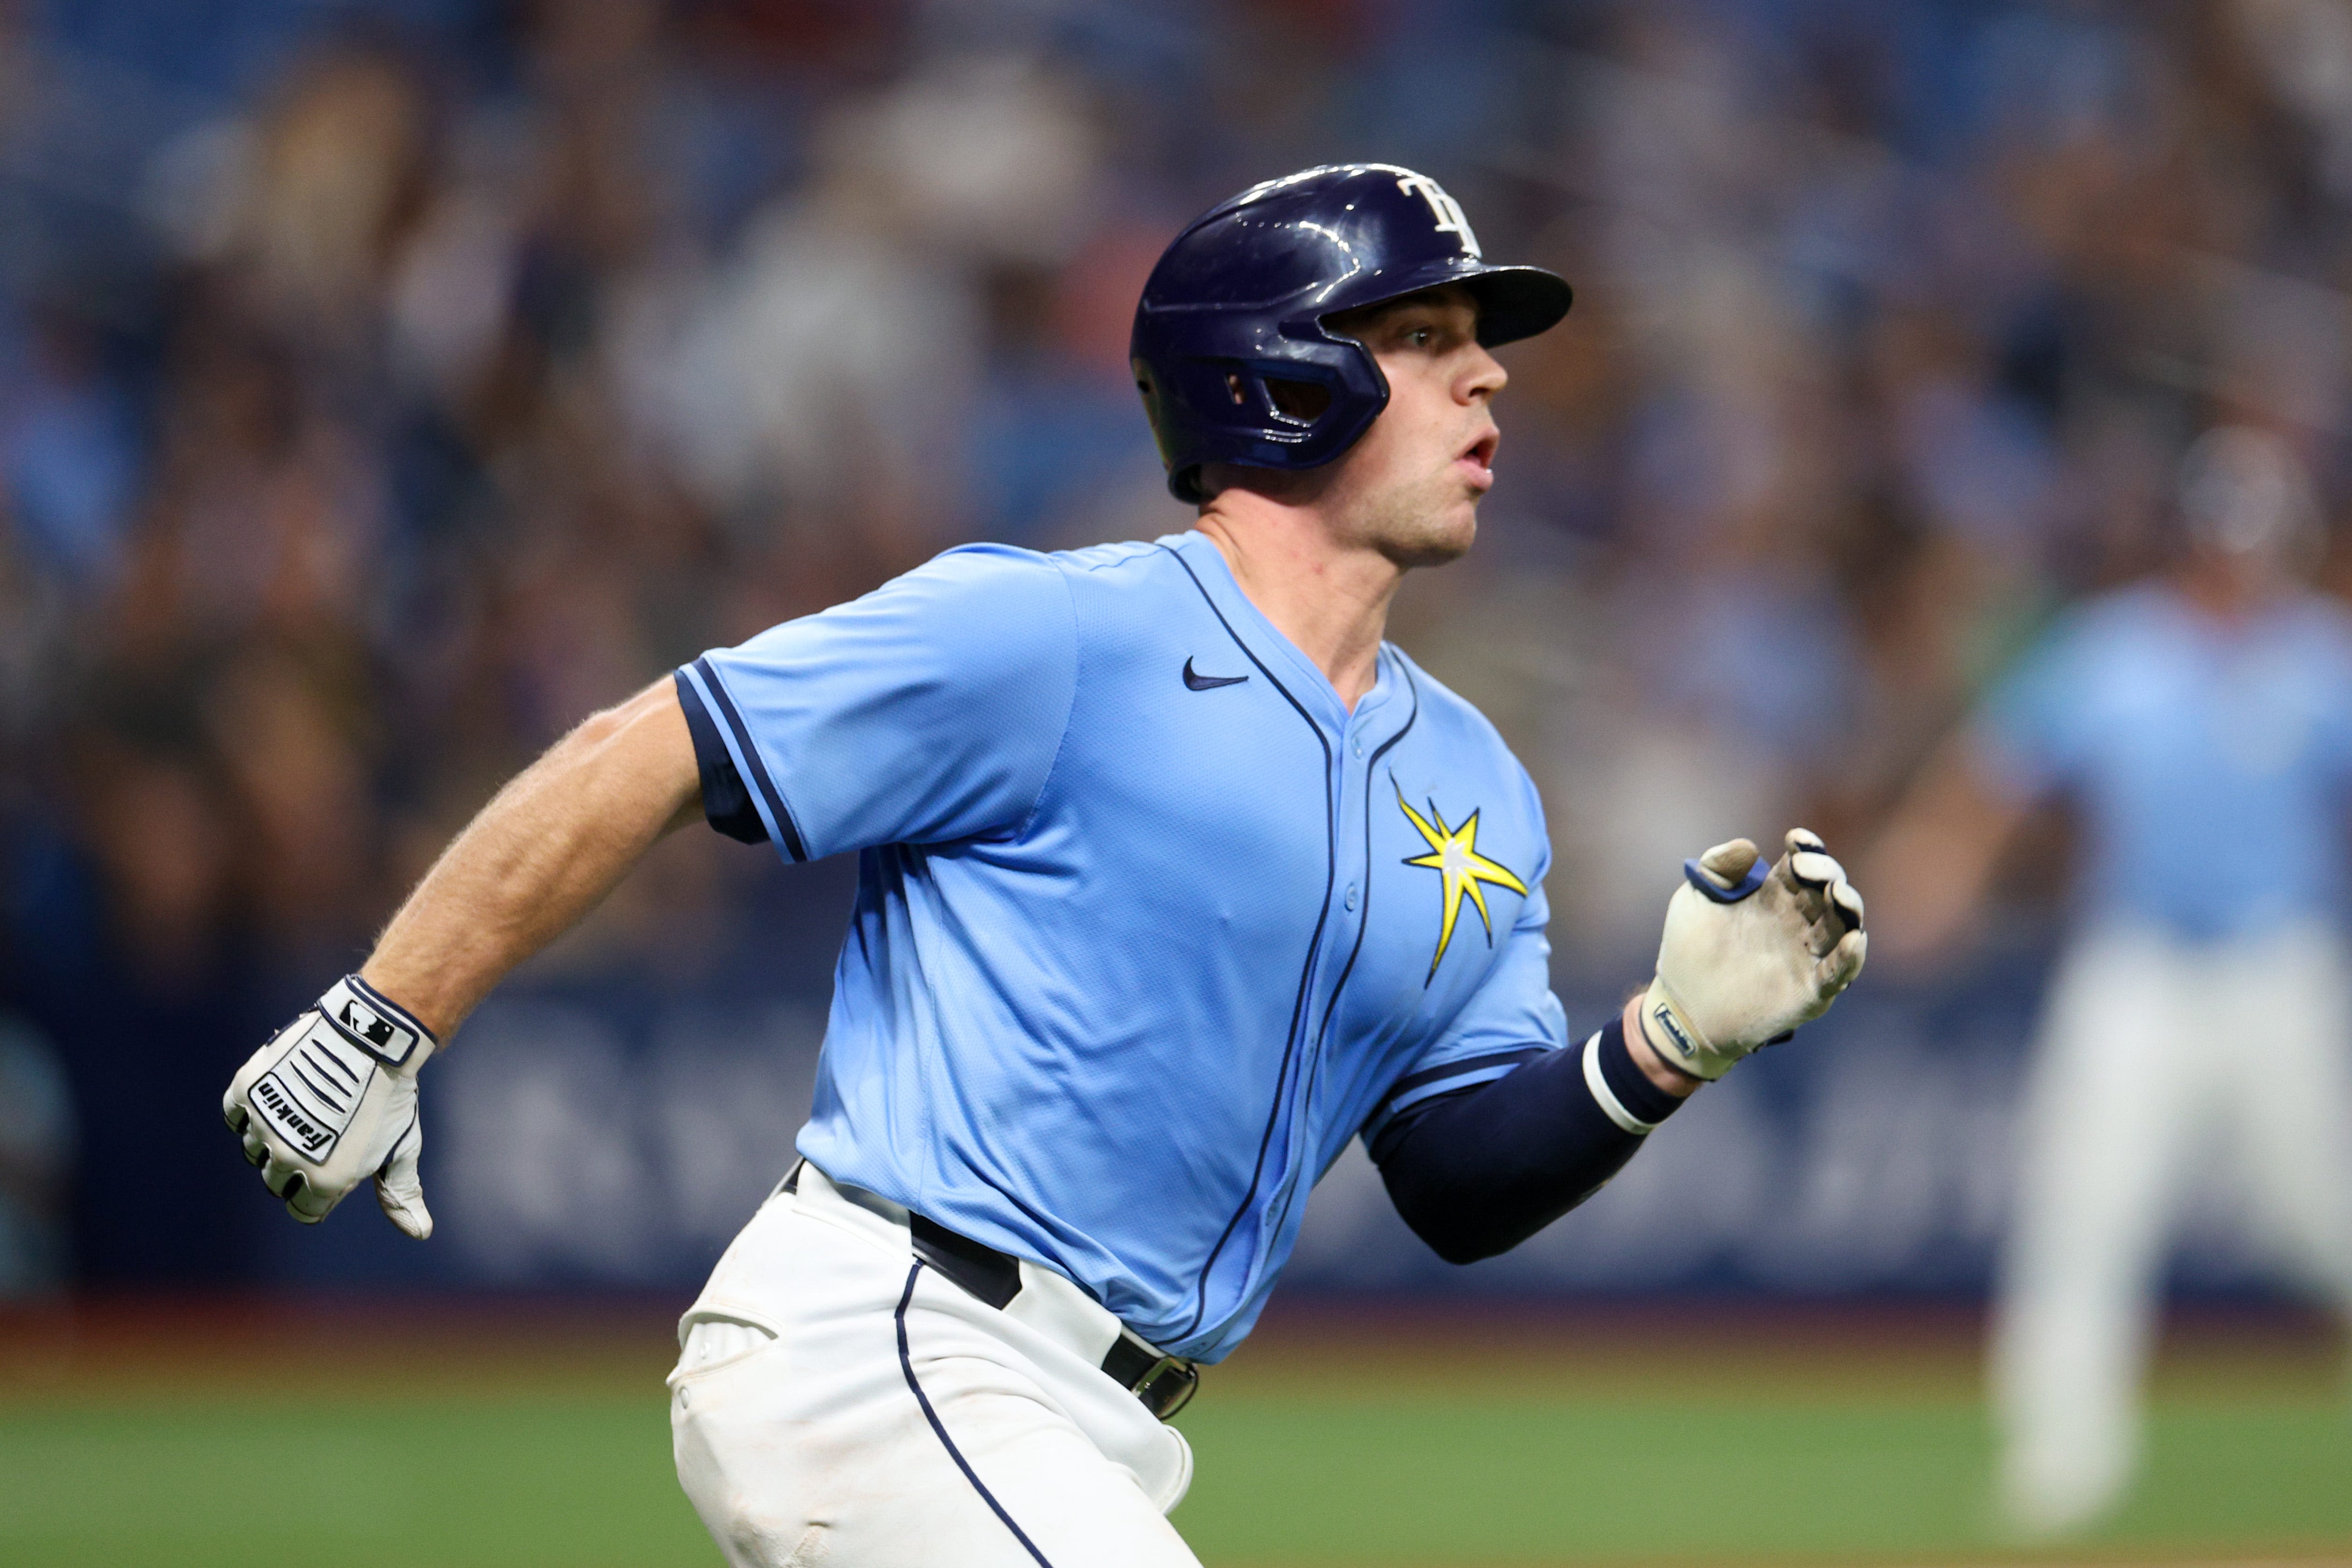 Verona native Ben Rortvedt appears to have found a permanent home with Tampa Bay Rays